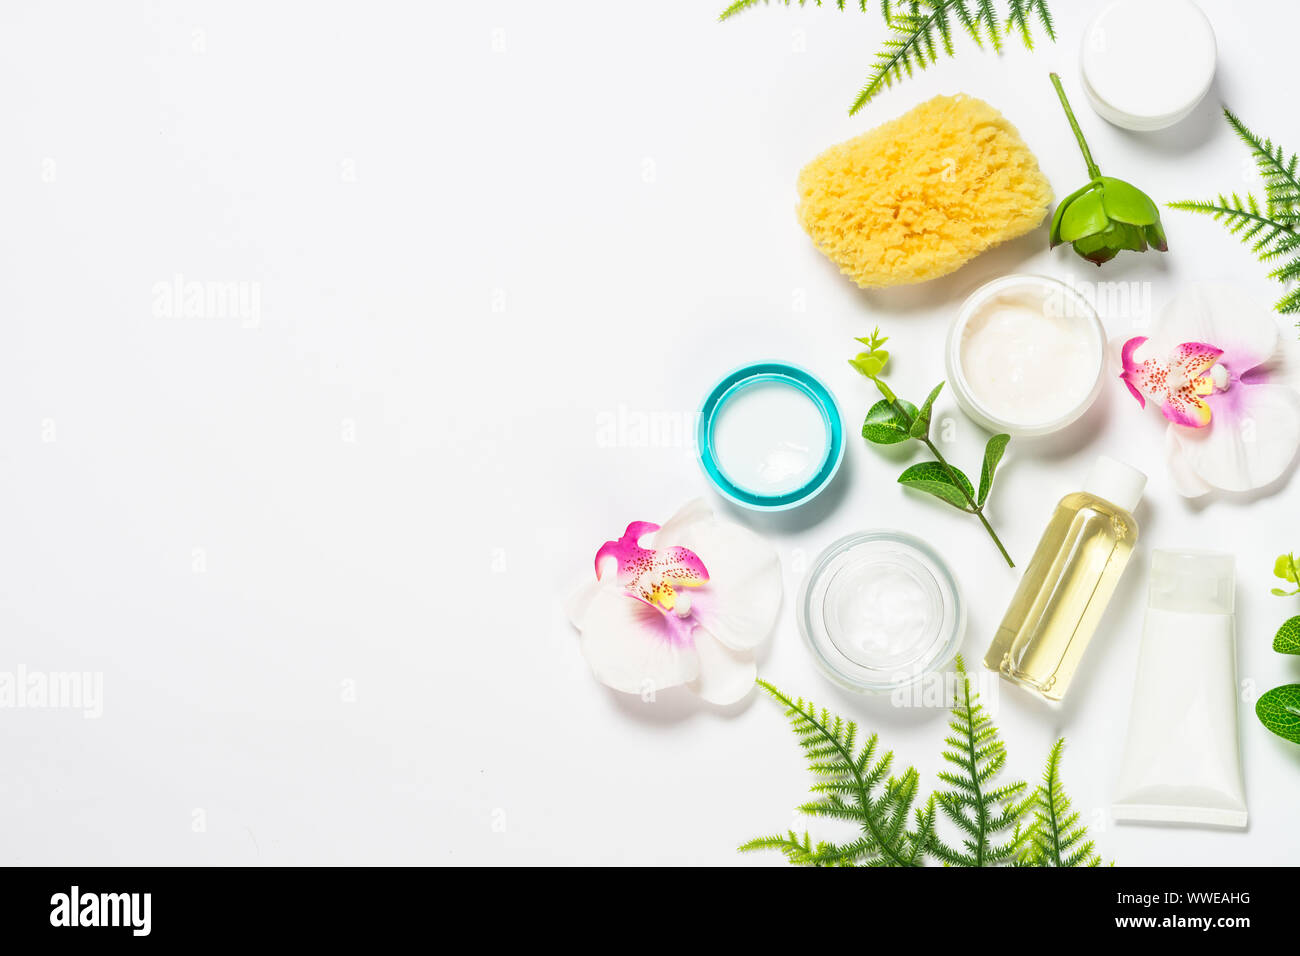 Natural osmetics, Skin care product on white. Stock Photo